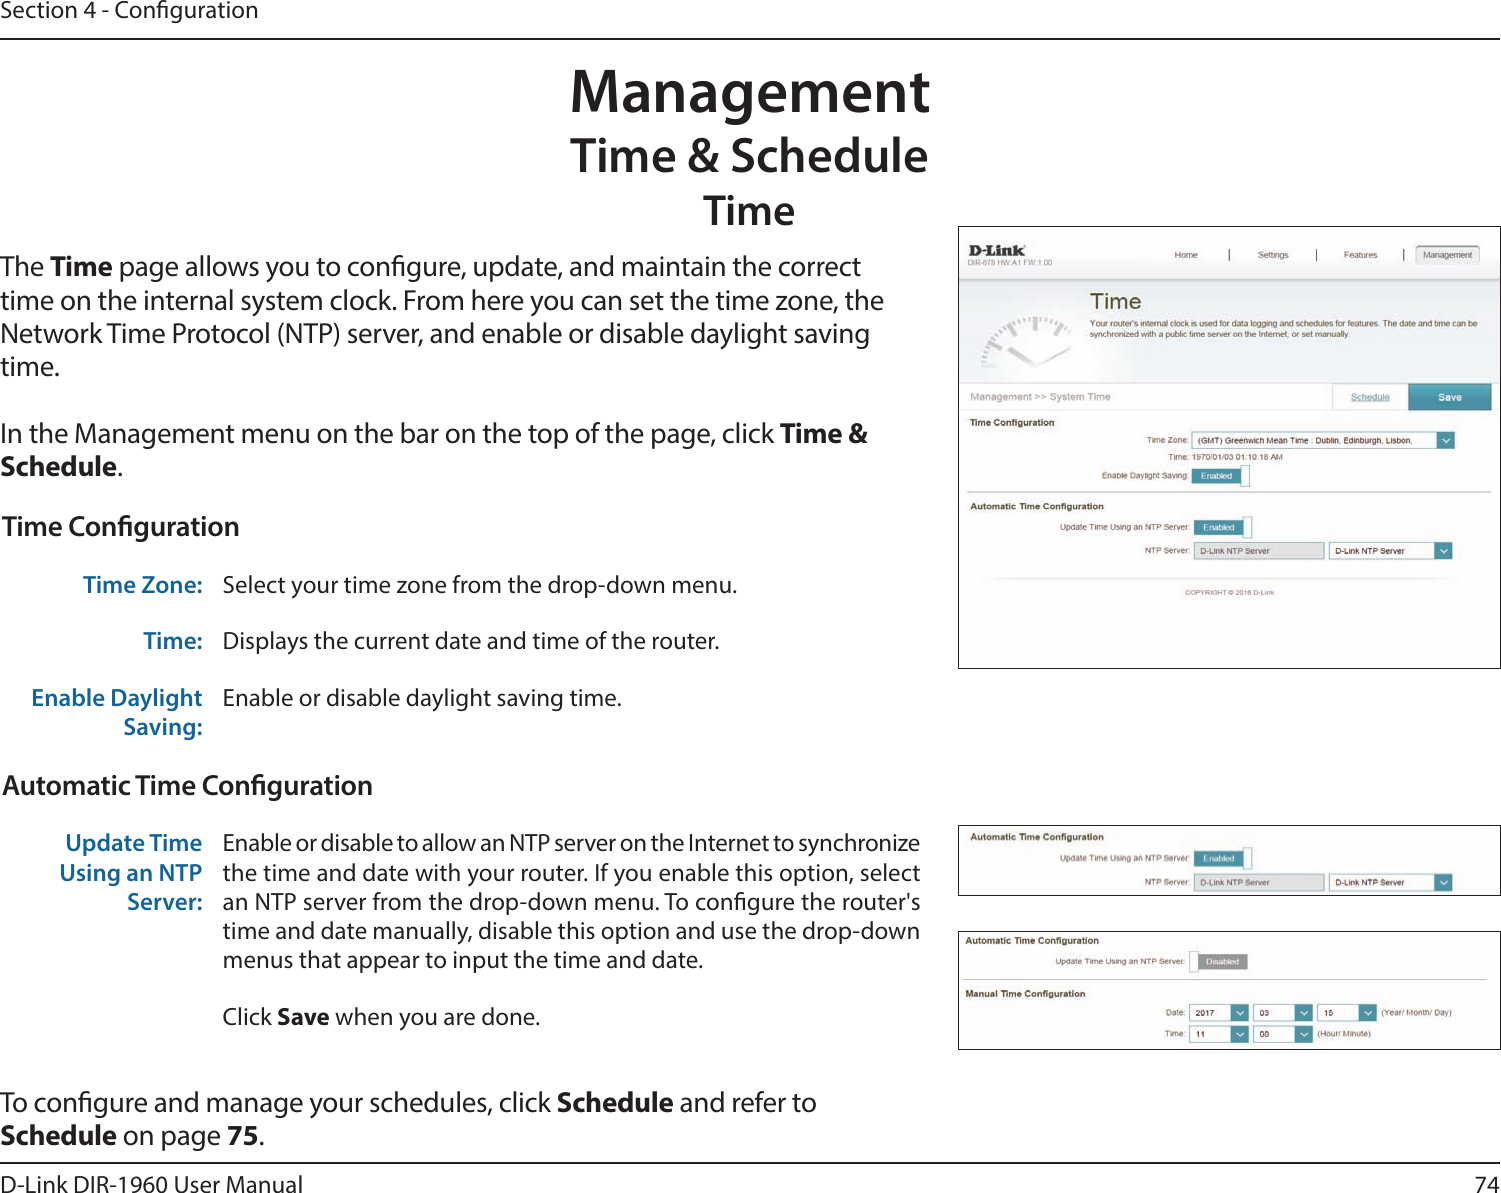 74D-Link DIR-1960 User ManualSection 4 - CongurationManagementTime &amp; ScheduleTimeThe Time page allows you to congure, update, and maintain the correct time on the internal system clock. From here you can set the time zone, the Network Time Protocol (NTP) server, and enable or disable daylight saving time.In the Management menu on the bar on the top of the page, click Time &amp; Schedule.To congure and manage your schedules, click Schedule and refer to Schedule on page 75.Time CongurationTime Zone: Select your time zone from the drop-down menu.Time: Displays the current date and time of the router.Enable Daylight Saving:Enable or disable daylight saving time.Automatic Time CongurationUpdate Time Using an NTP Server:Enable or disable to allow an NTP server on the Internet to synchronize the time and date with your router. If you enable this option, select an NTP server from the drop-down menu. To congure the router&apos;s time and date manually, disable this option and use the drop-down menus that appear to input the time and date.Click Save when you are done.